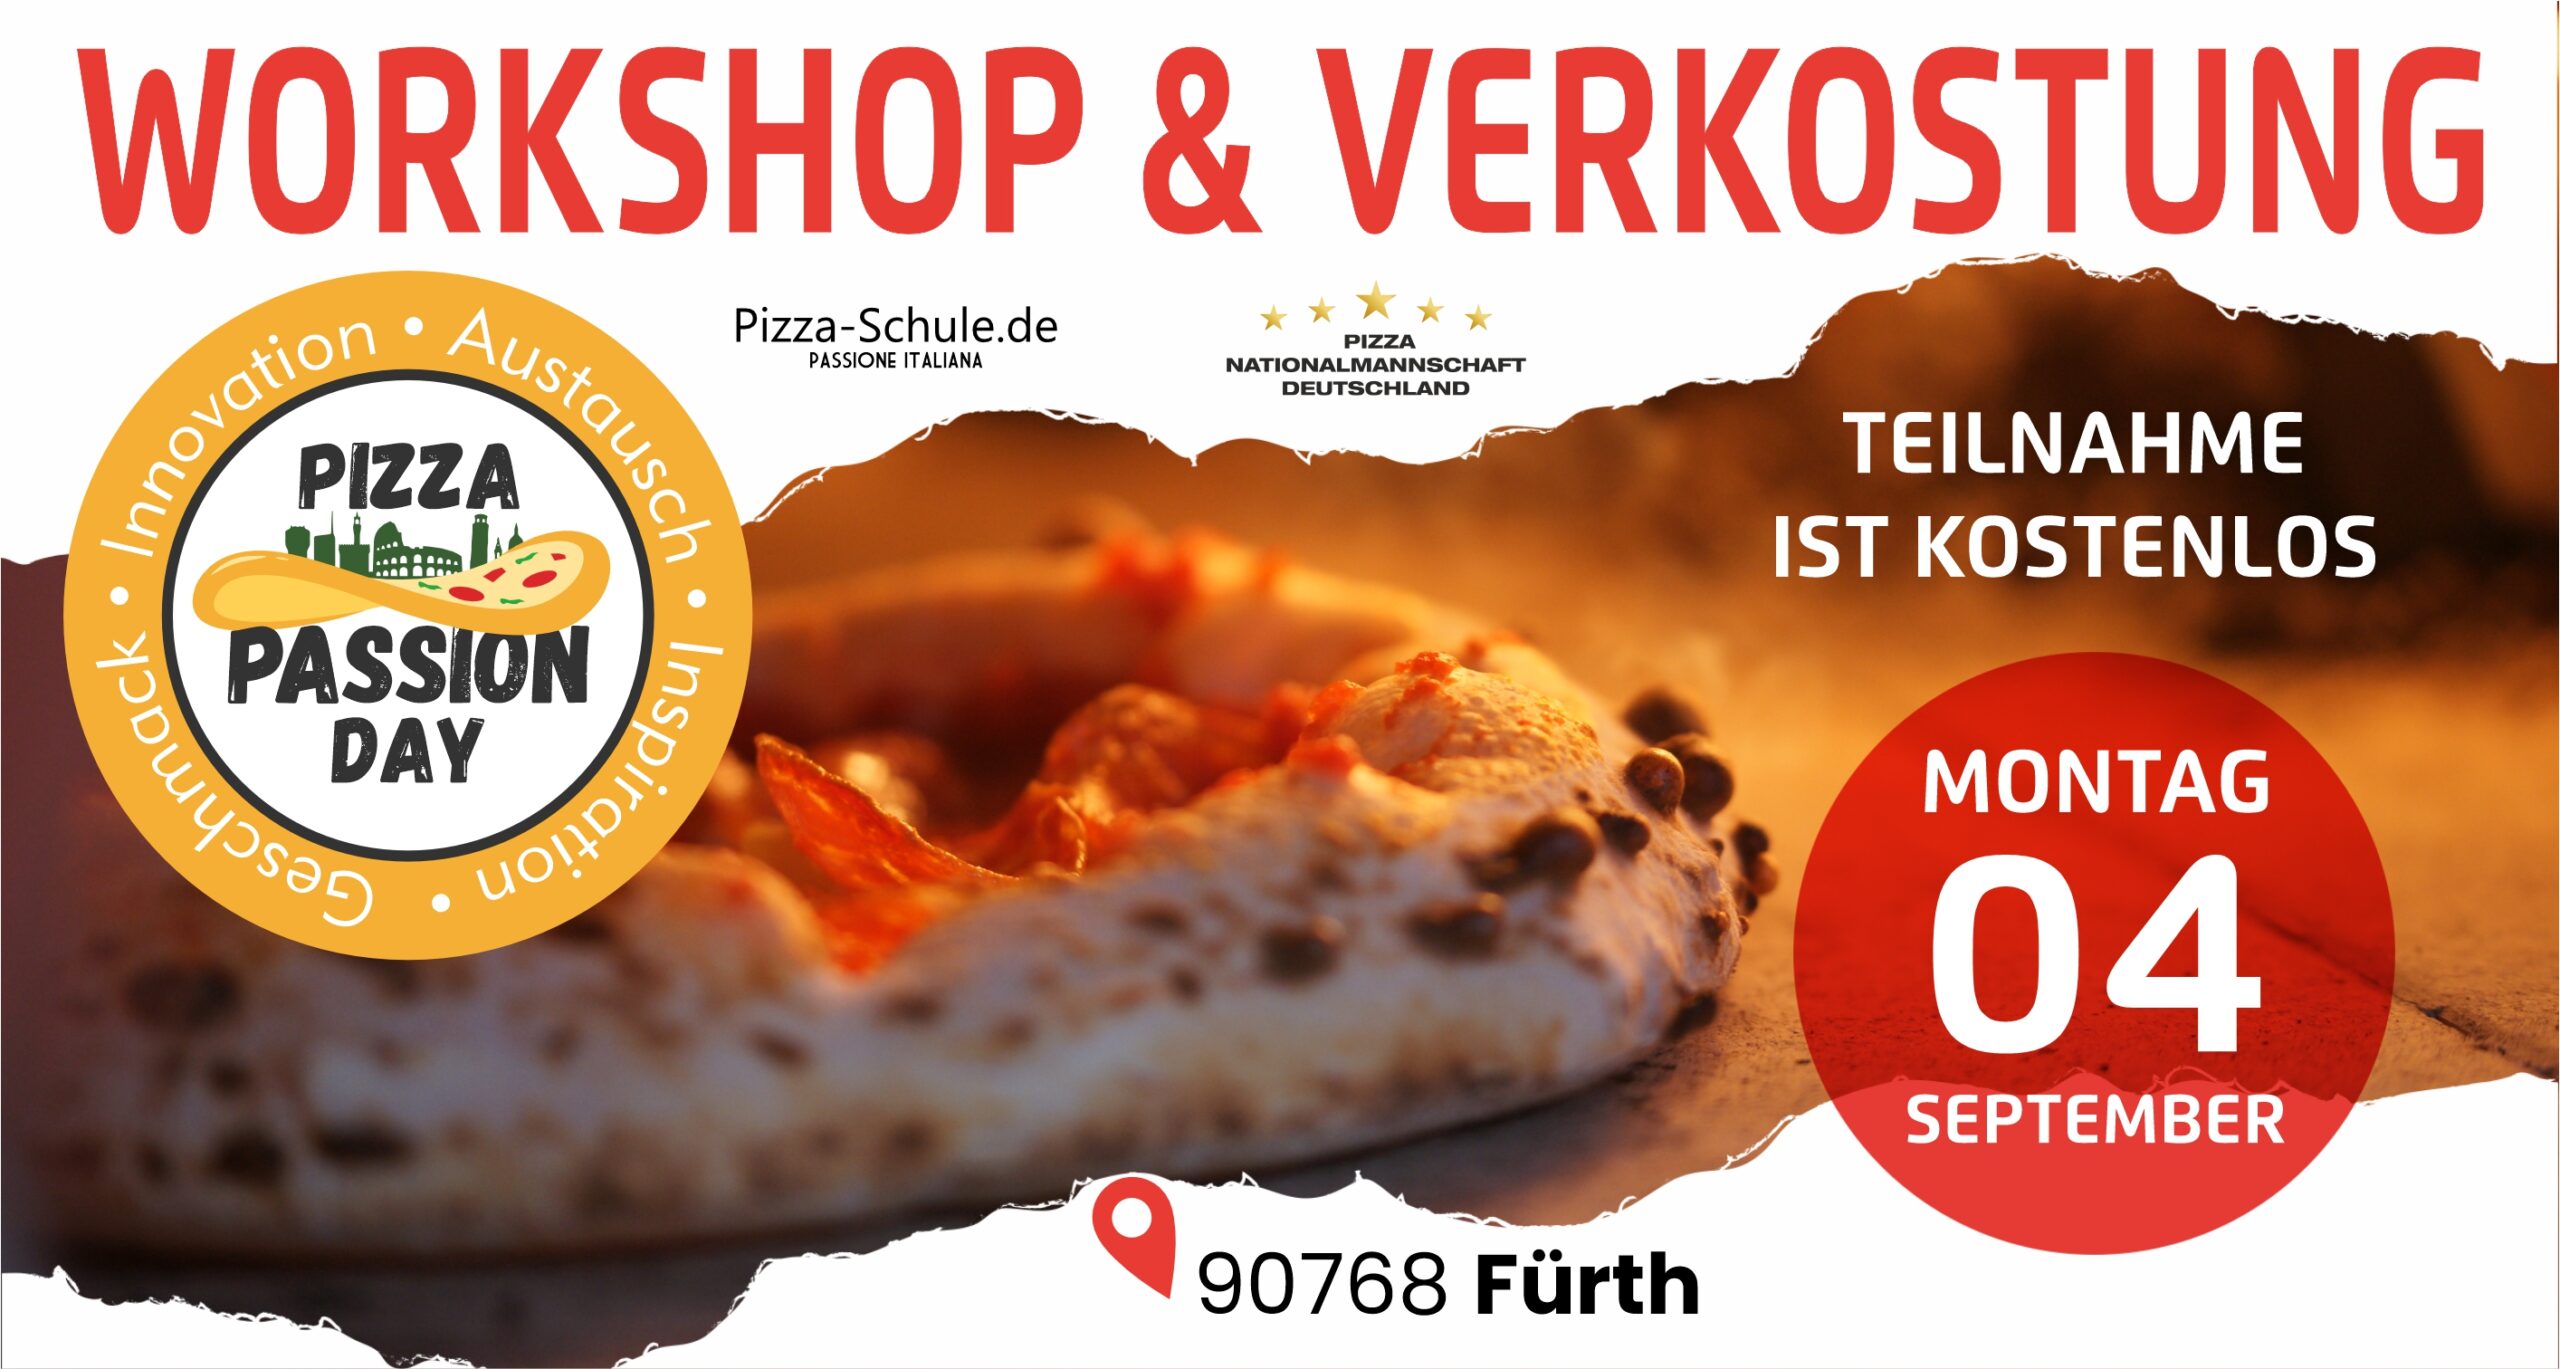 Pizza Passion Day